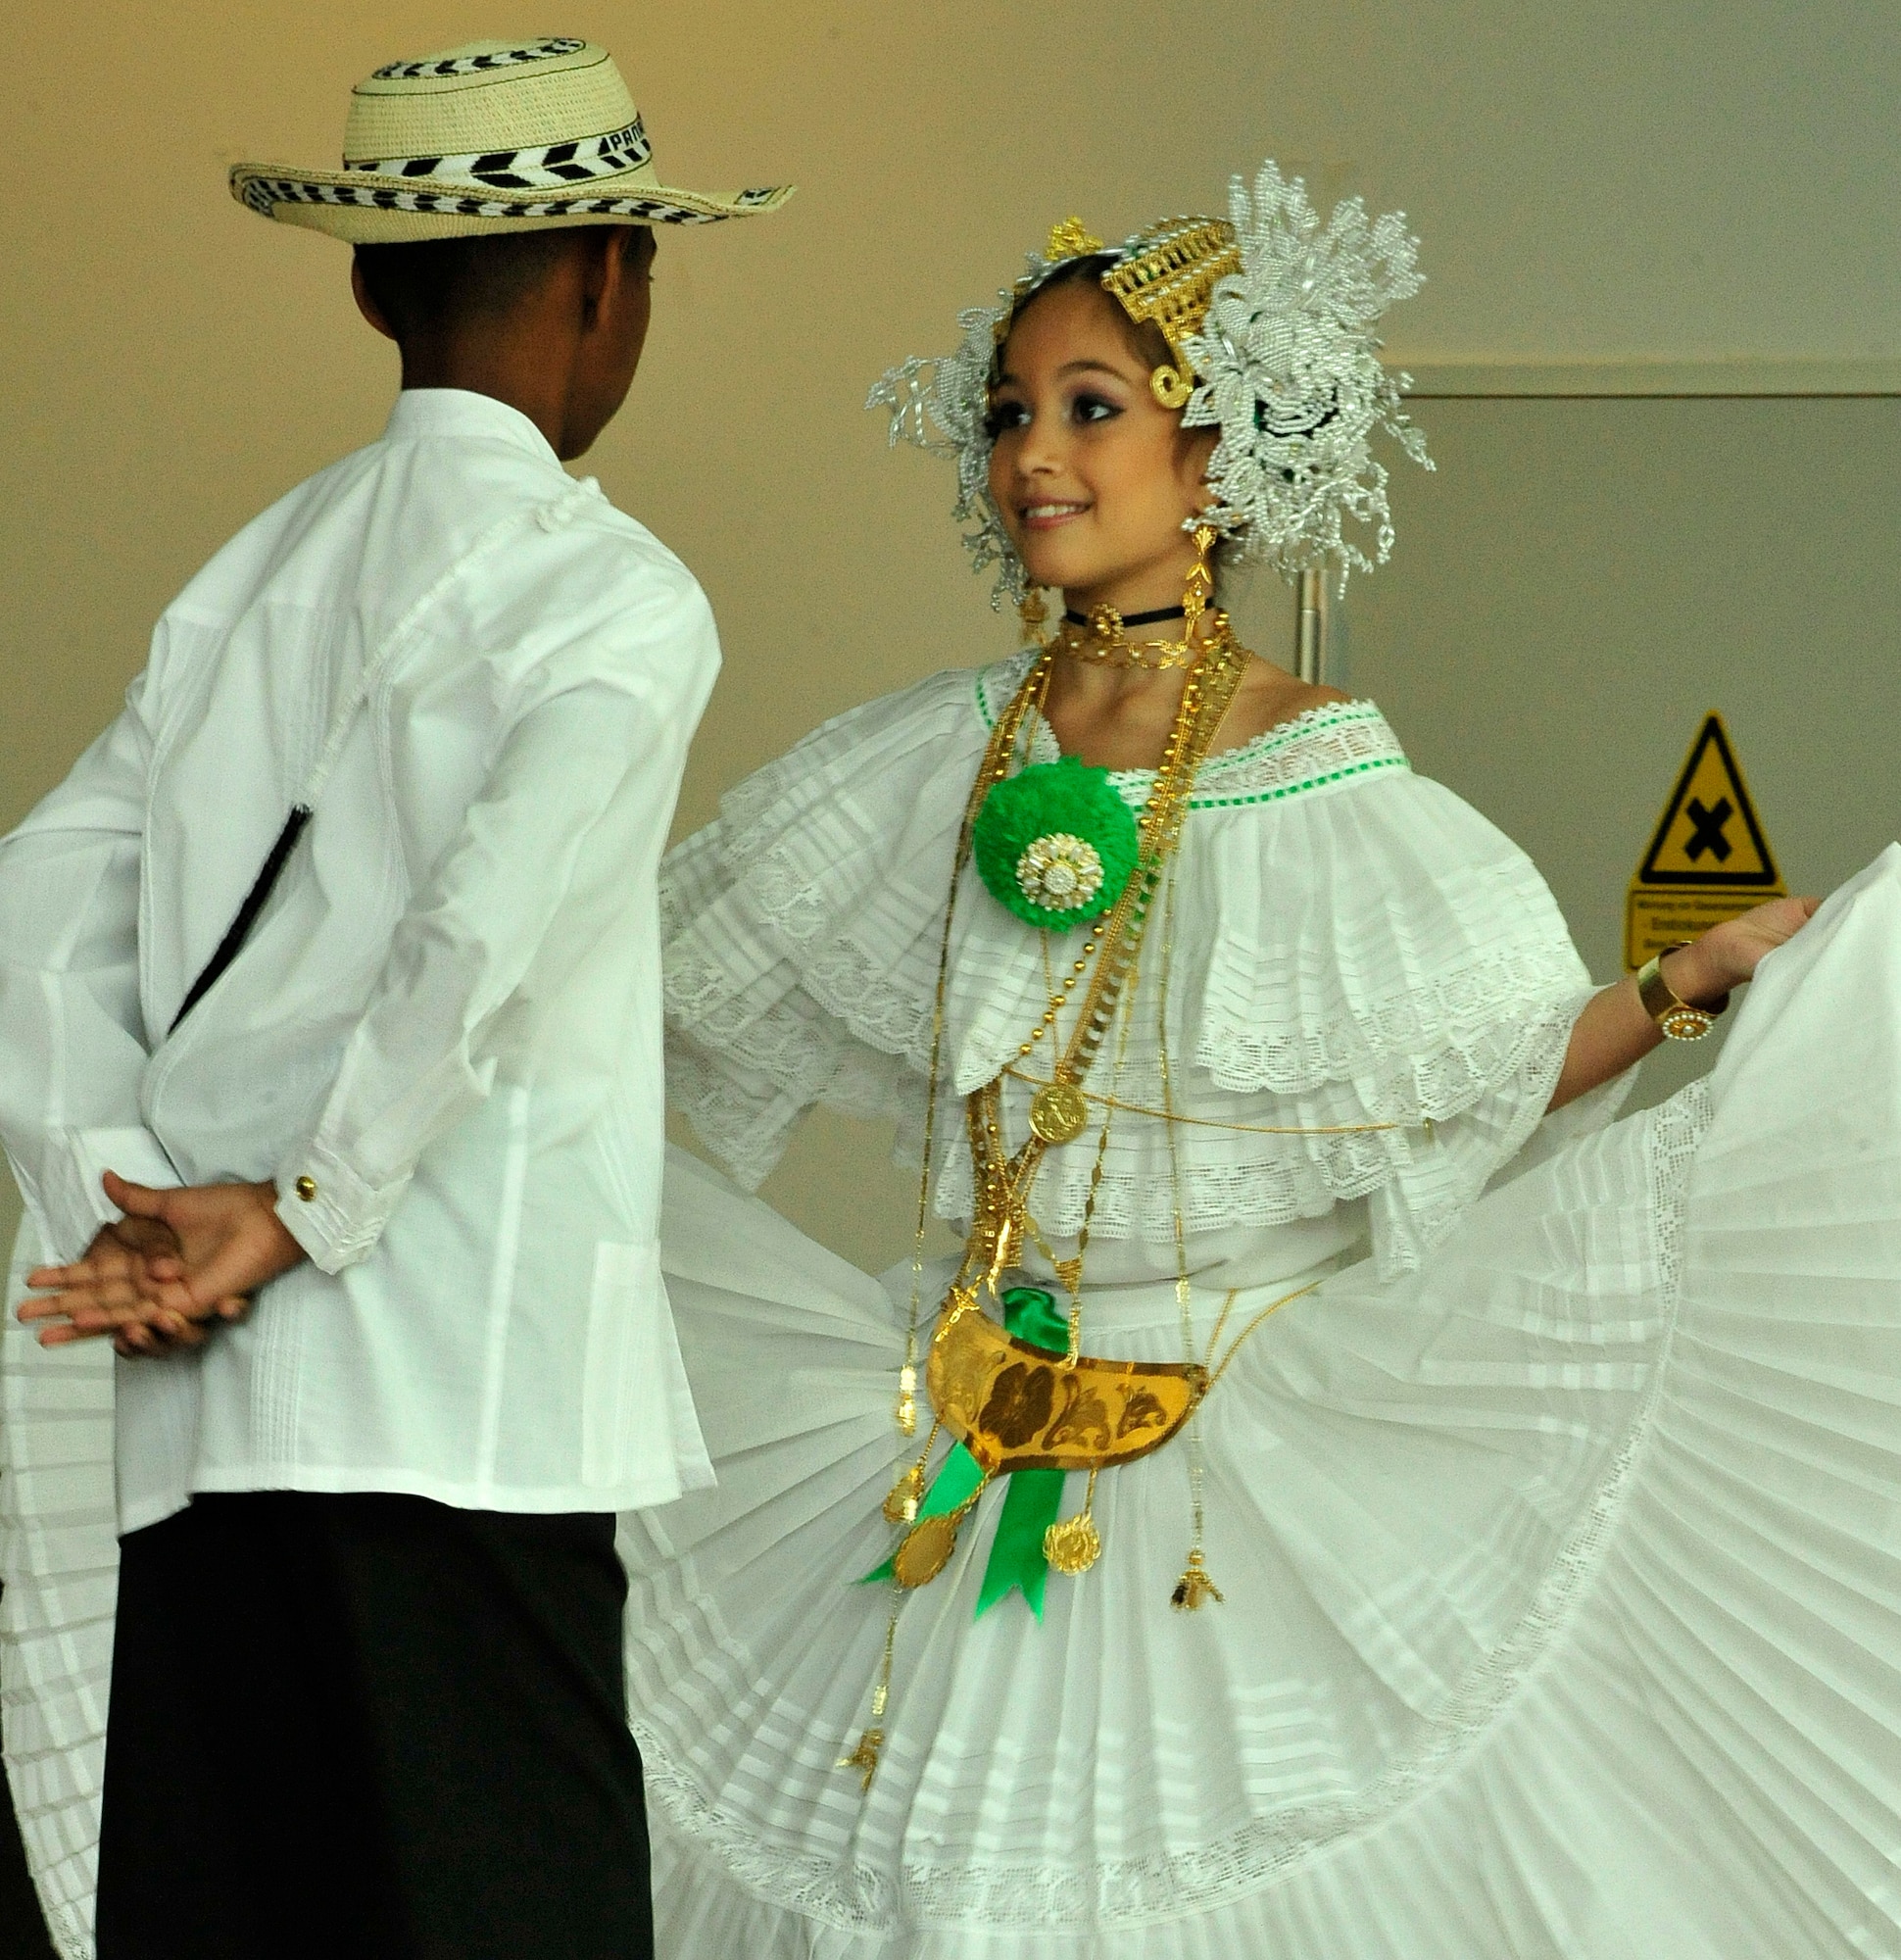 U.S. Army dependants Brandon Howell and Melanie Aberg, perform a traditional Panamanian courtship dance titled "El Punto", during the Hispanic Heritage month kickoff event held at the Kaiserslautern Military Community Center, Ramstein Air Base, Germany, Sept. 18, 2010. Hispanic Heritage month events celebrate heritage, diversity, integrity and honor and take place from Sept. 15 through Oct. 15 this year. (U.S. Air Force photo by Staff Sgt. Stephen J. Otero)